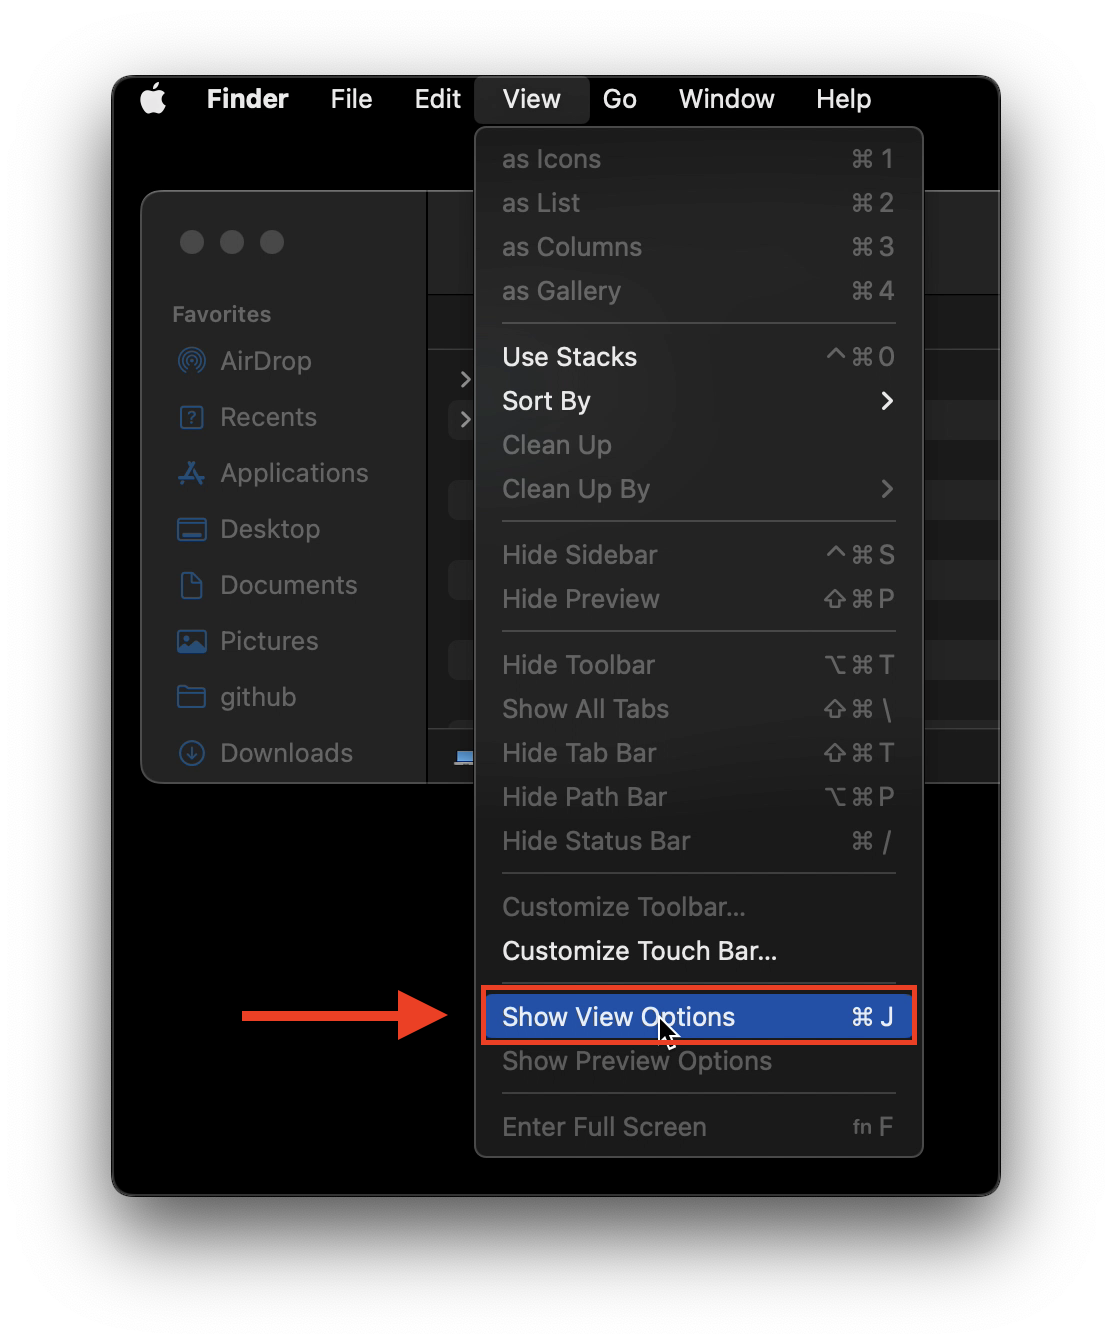 Finder 'View' drop down menu open with 'Show View Options' selected